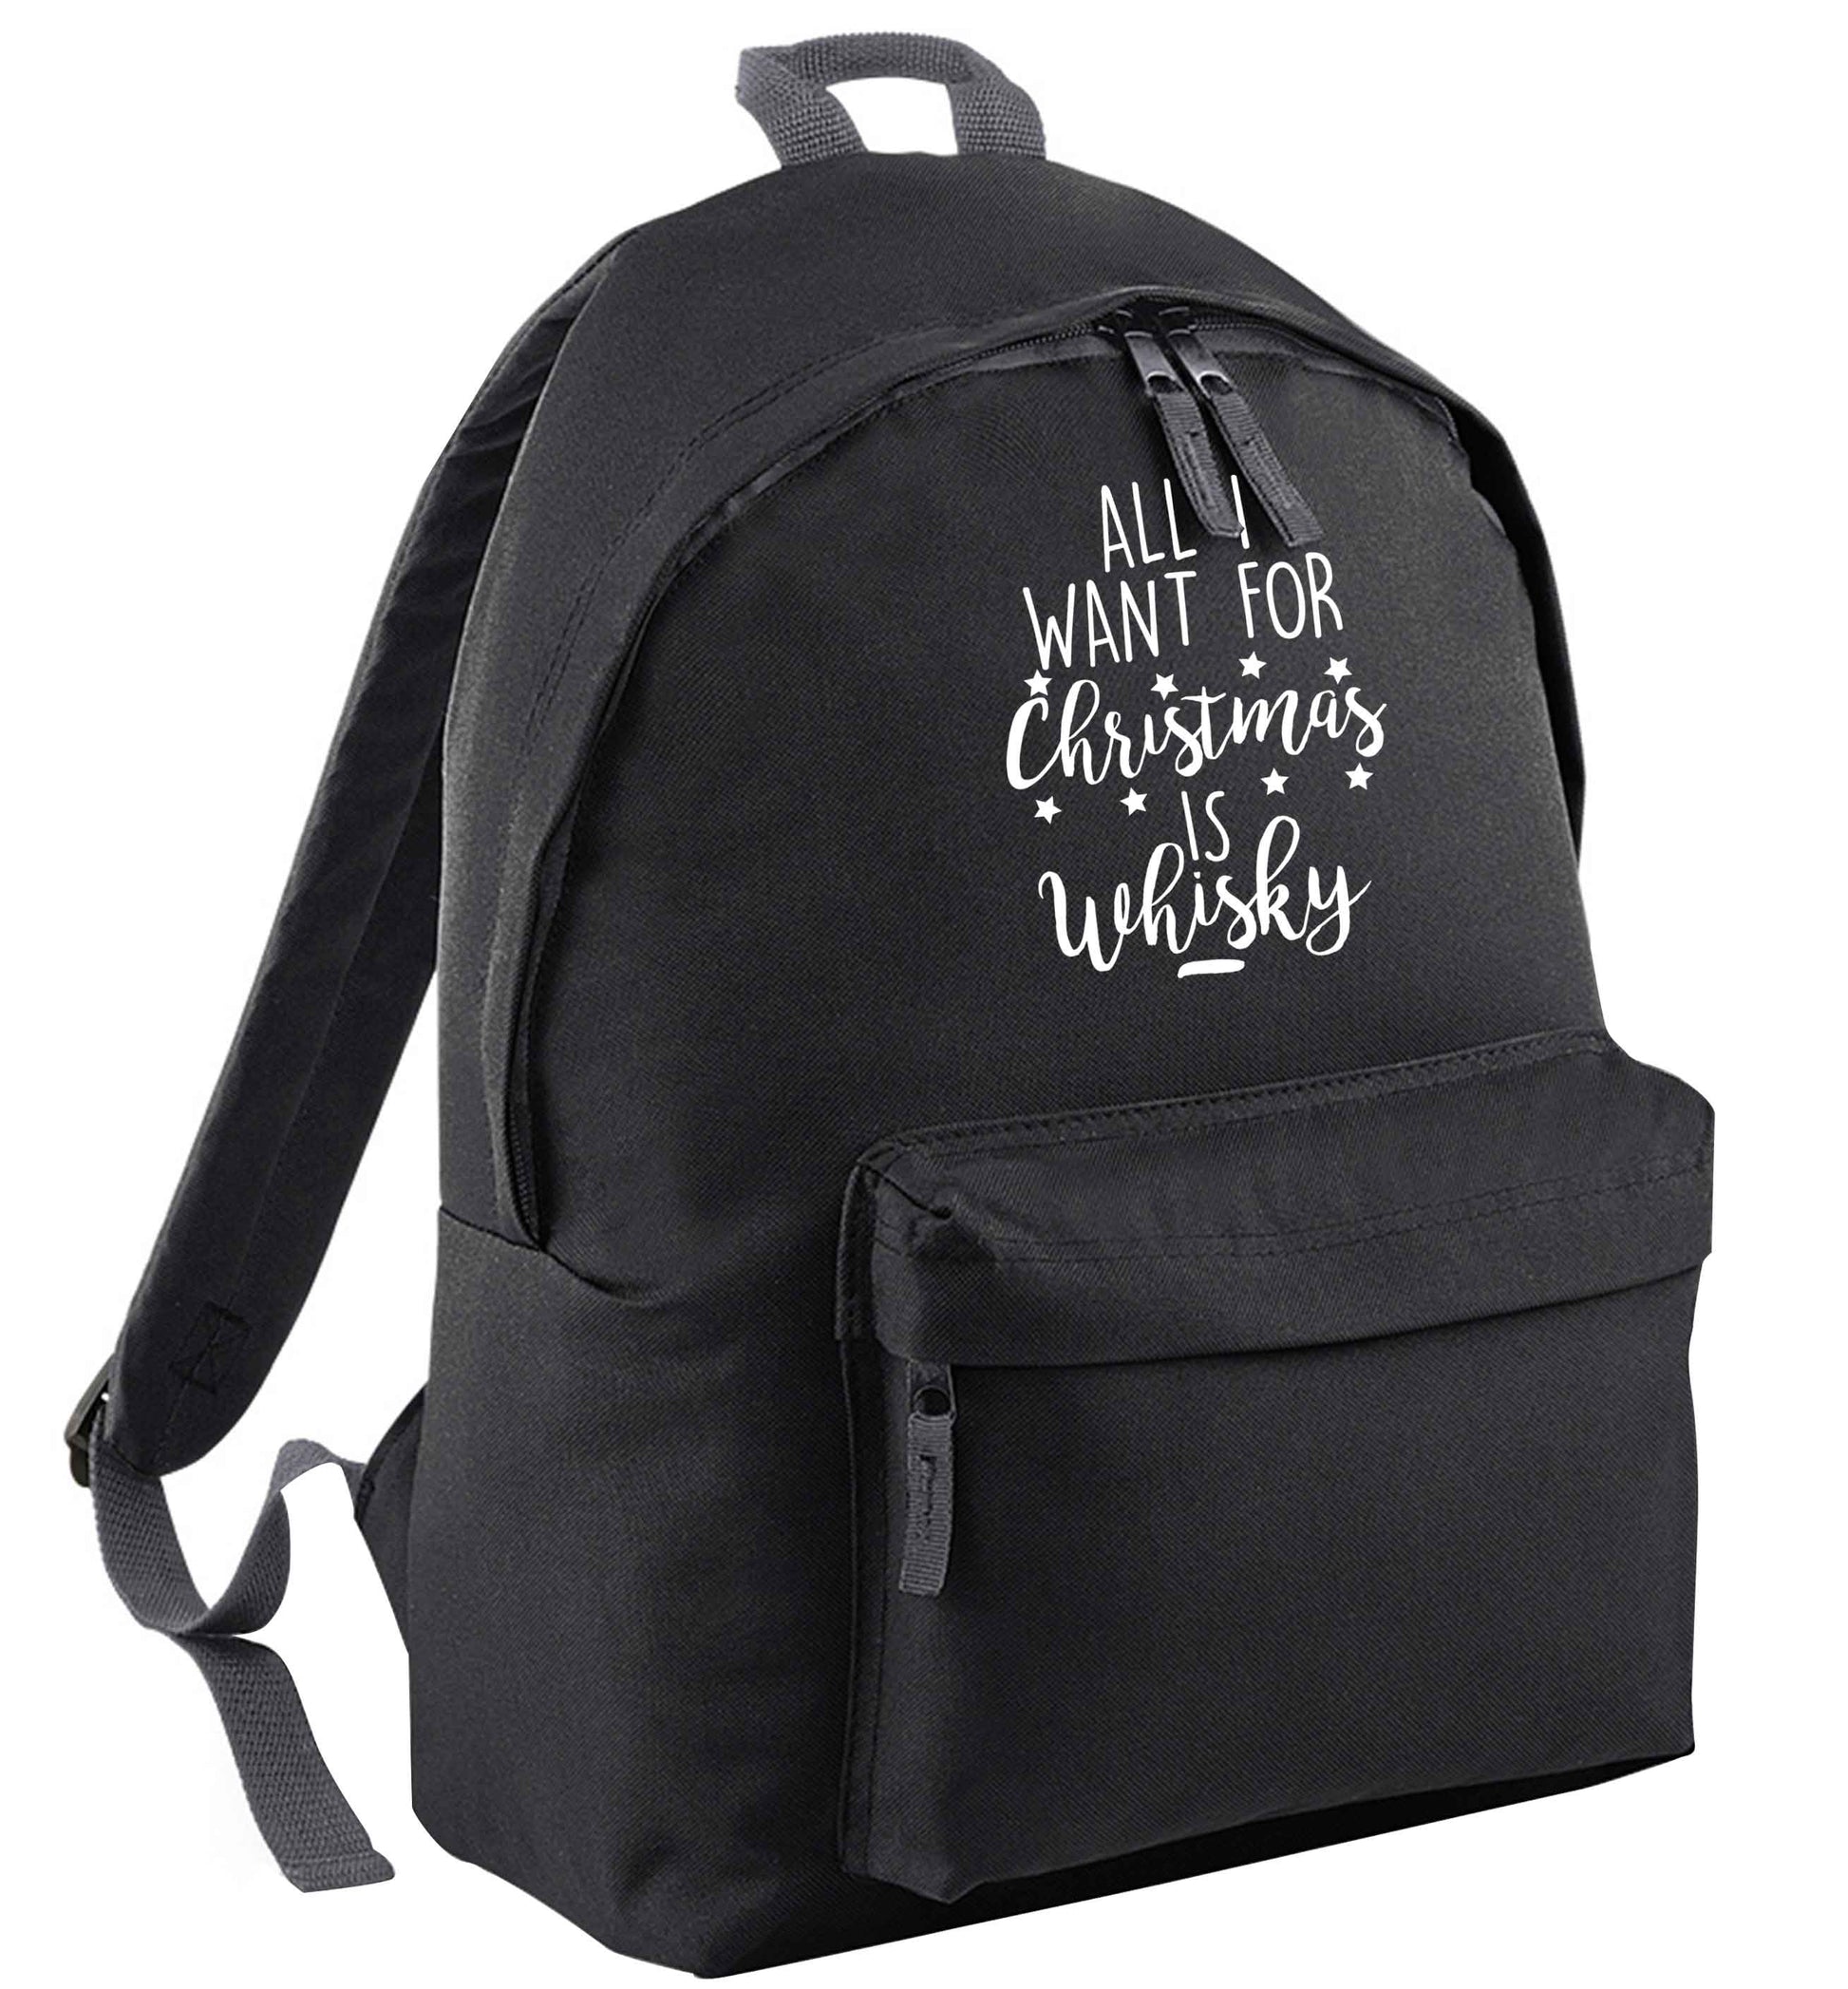 All I want for Christmas is whisky black adults backpack